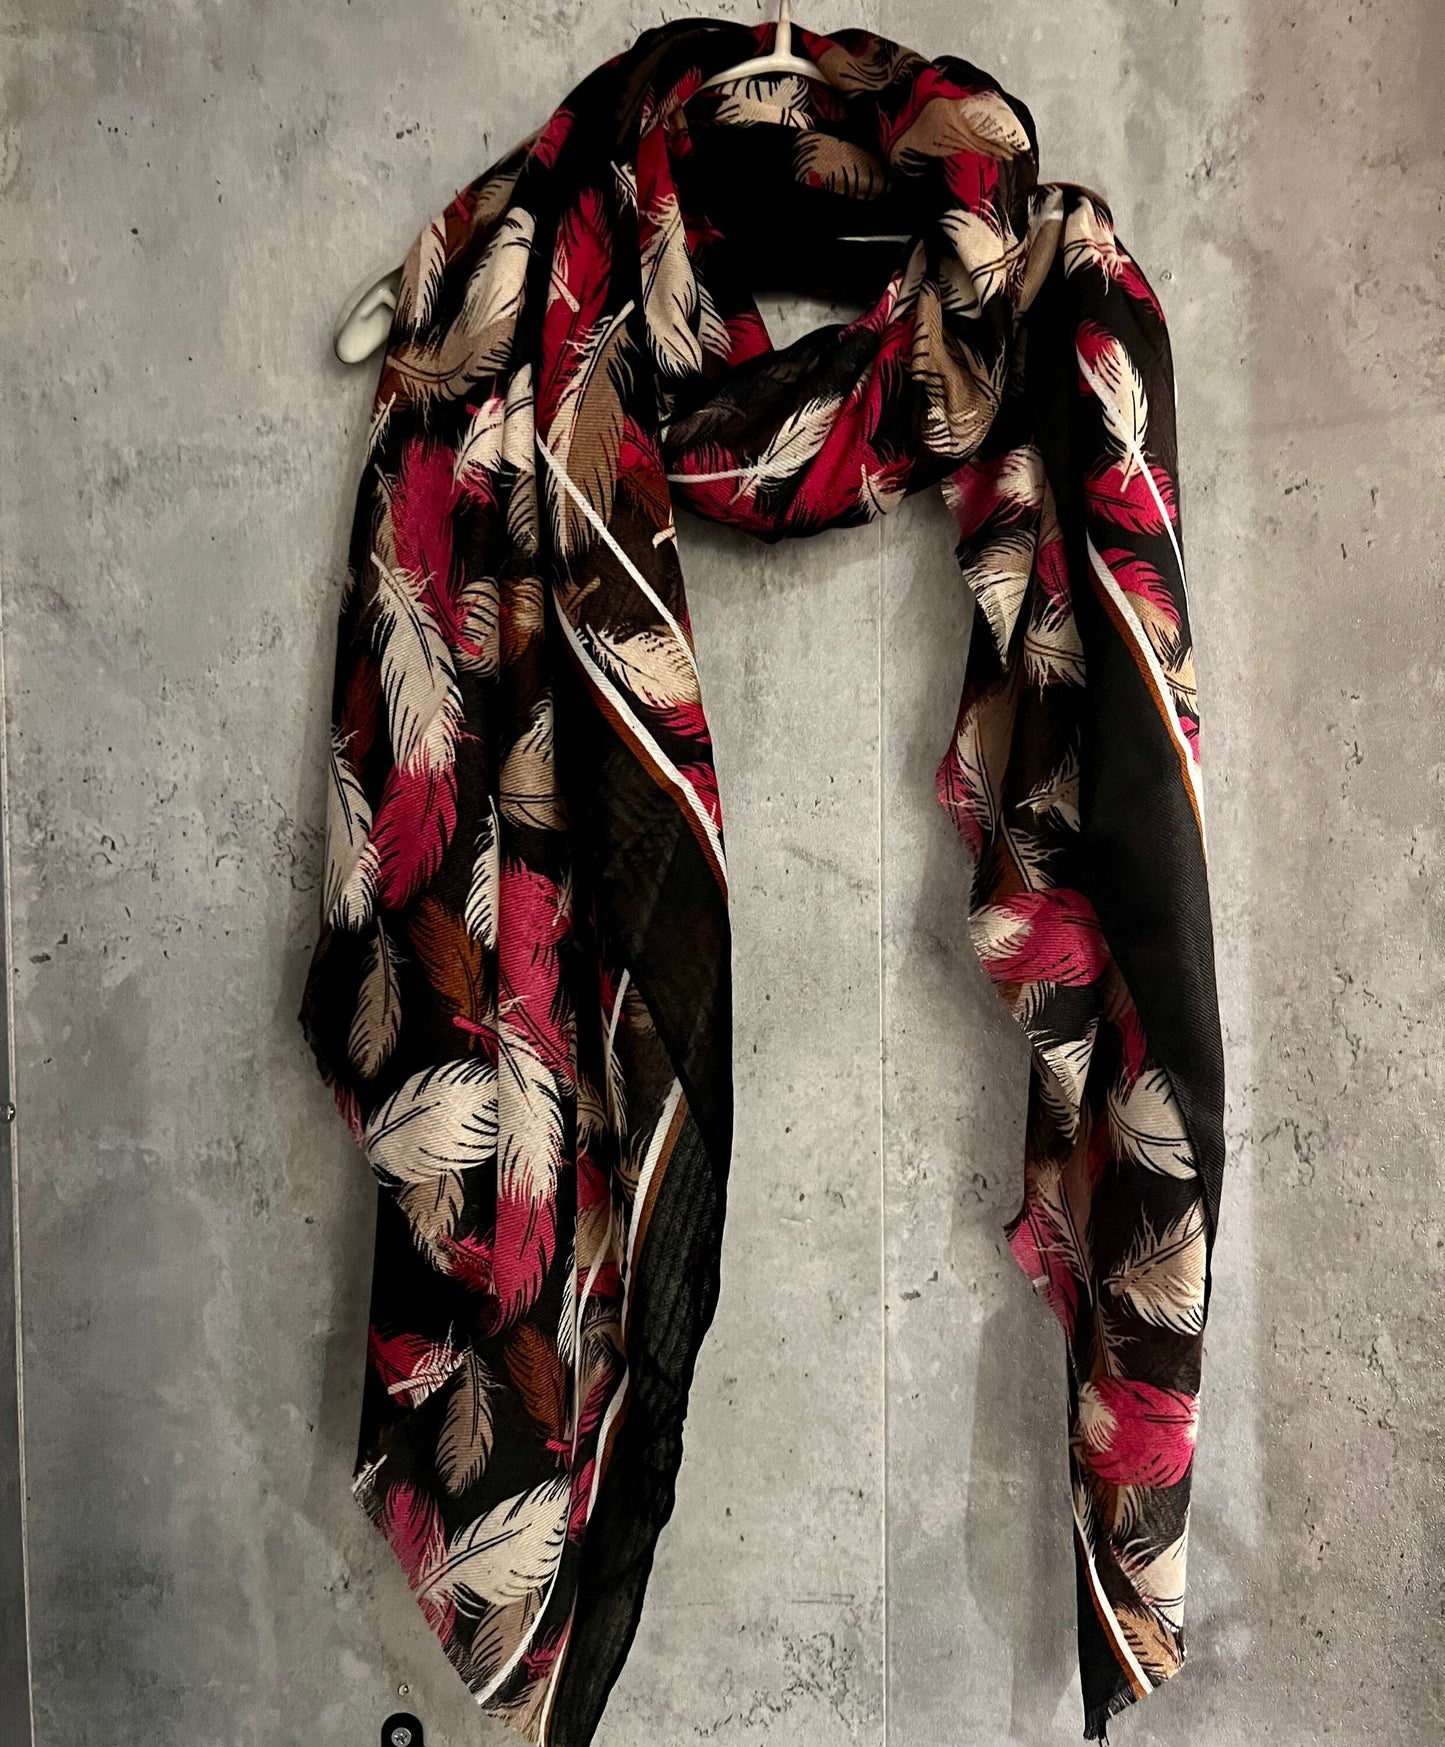 Floating White Pink Feathers Black Cotton Scarf/Summer Autumn Winter Women Scarf/Gifts For Her Birthday Christmas/UK Seller/Printed Scarf